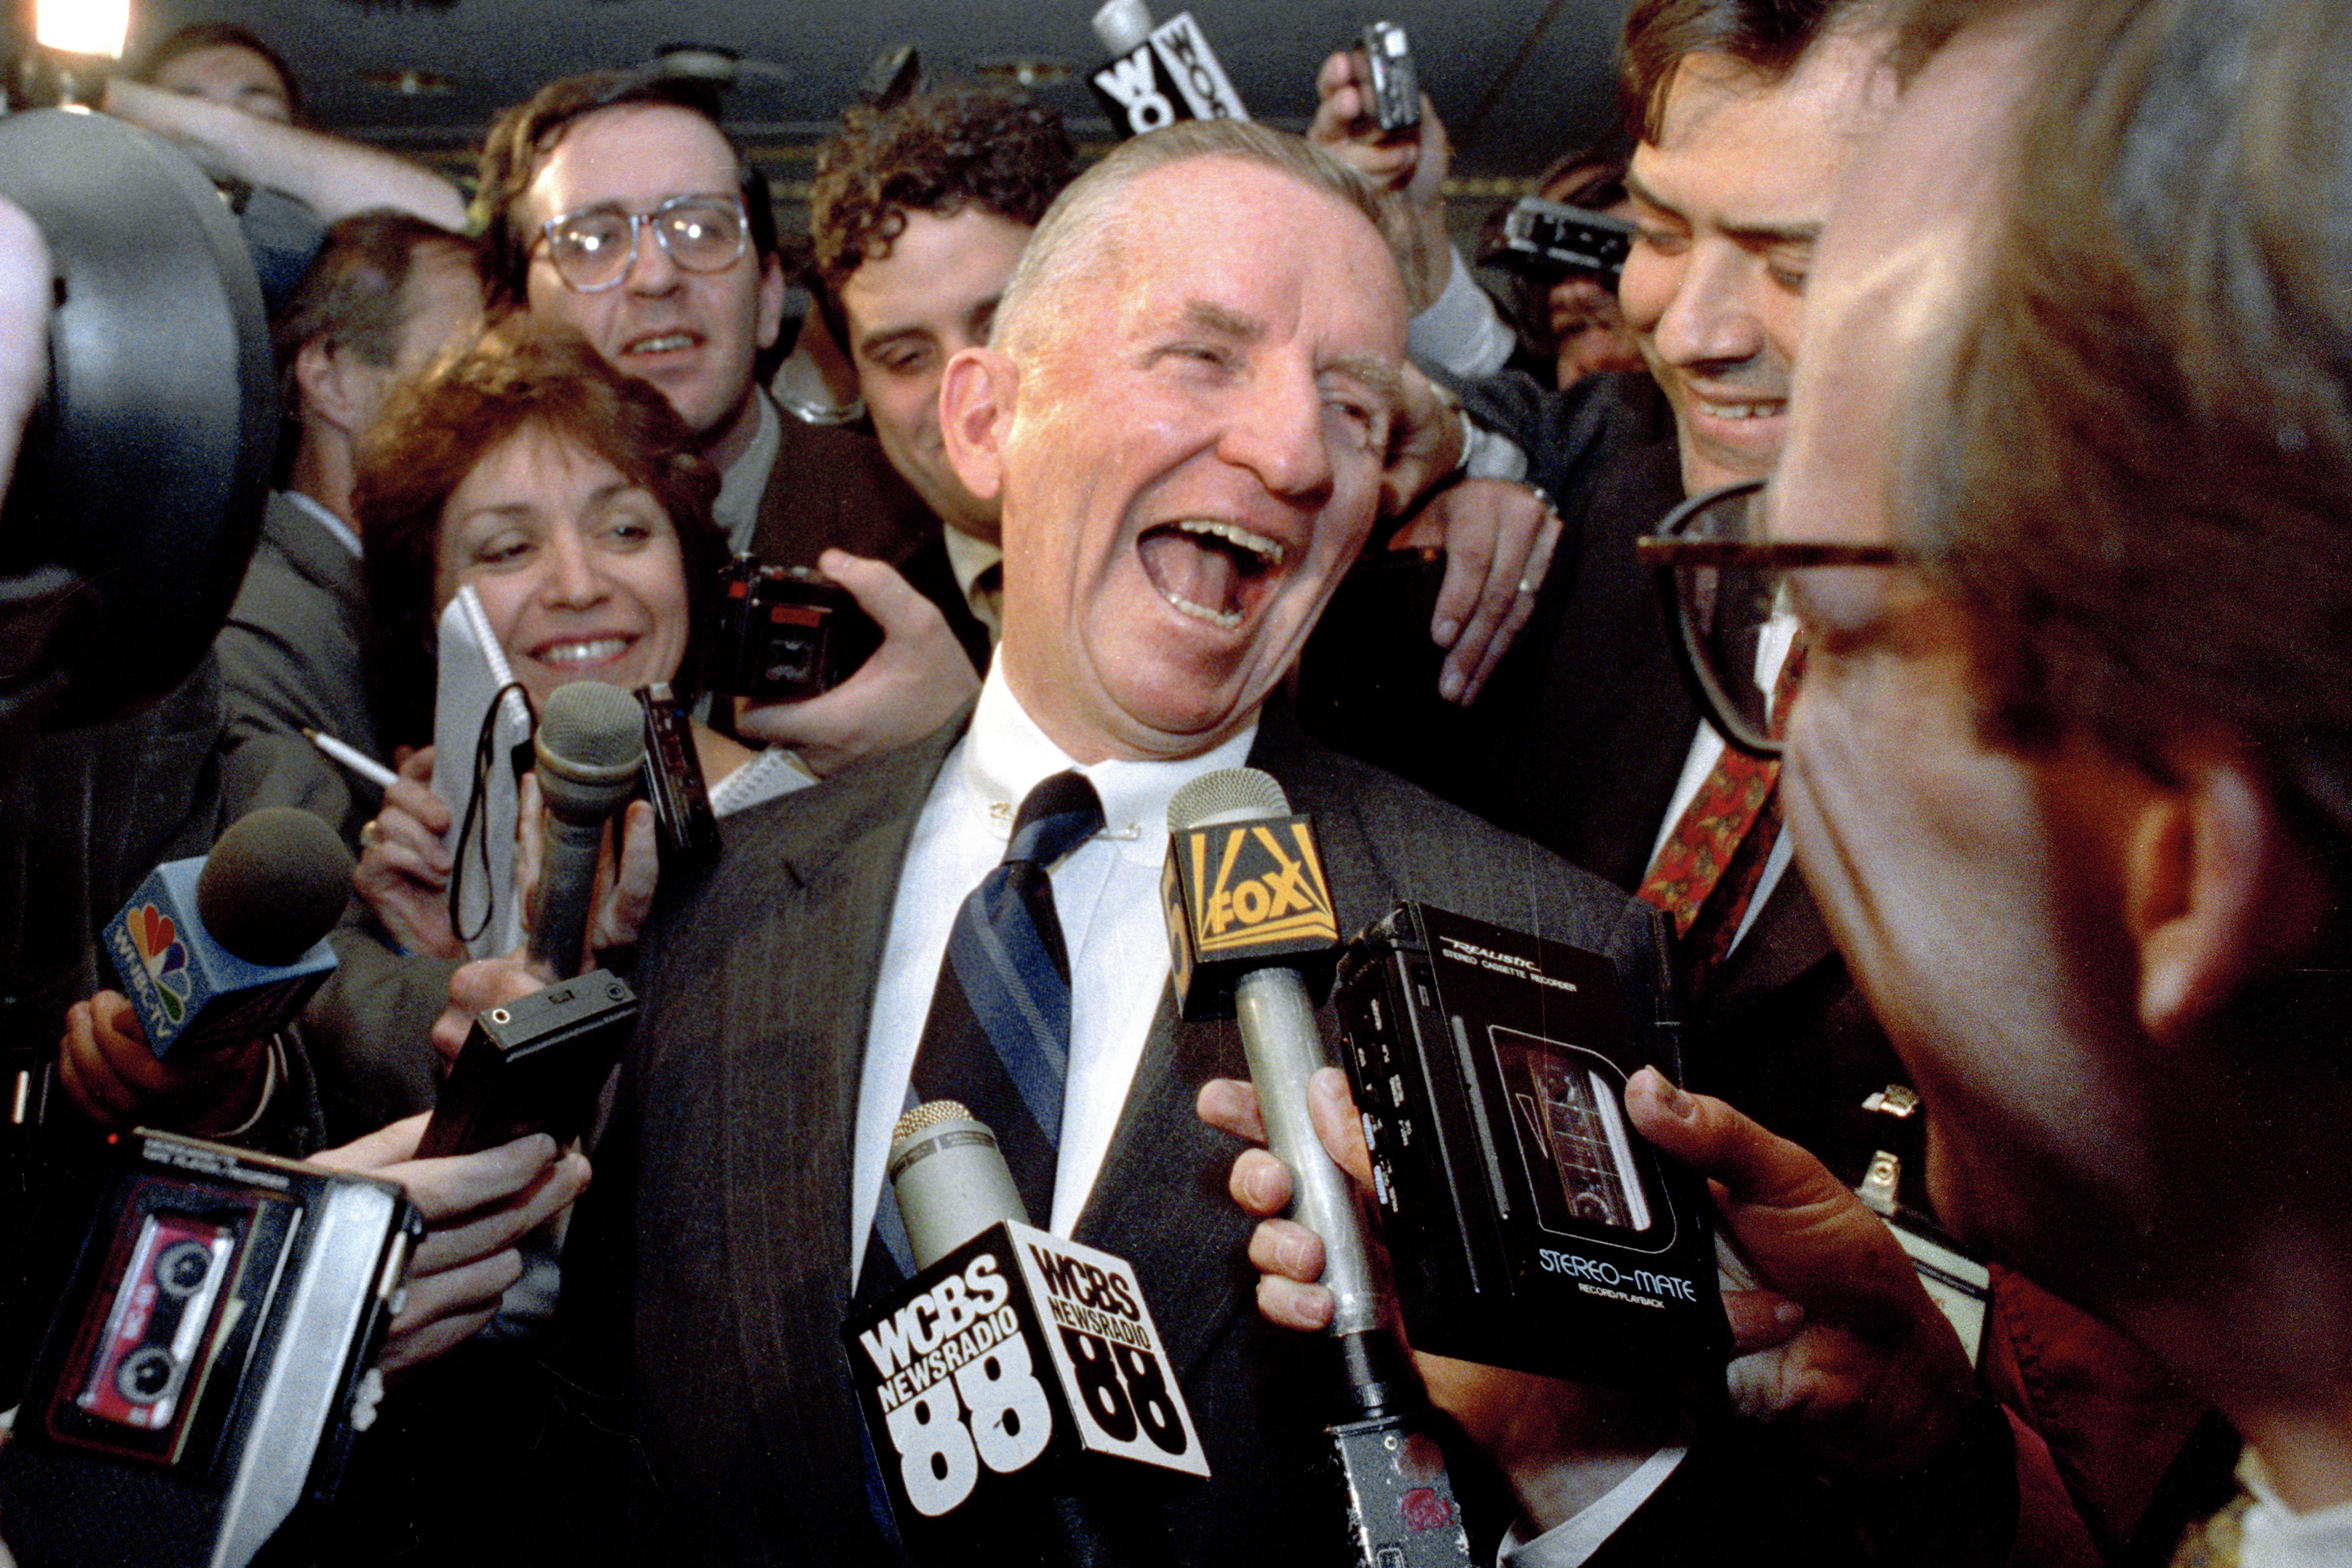 Texas billionaire Ross Perot, who died on July 9 at age 89, captivated the American public with a presidential campaign that used many of the same themes Donald Trump would later employ. Photo: AP